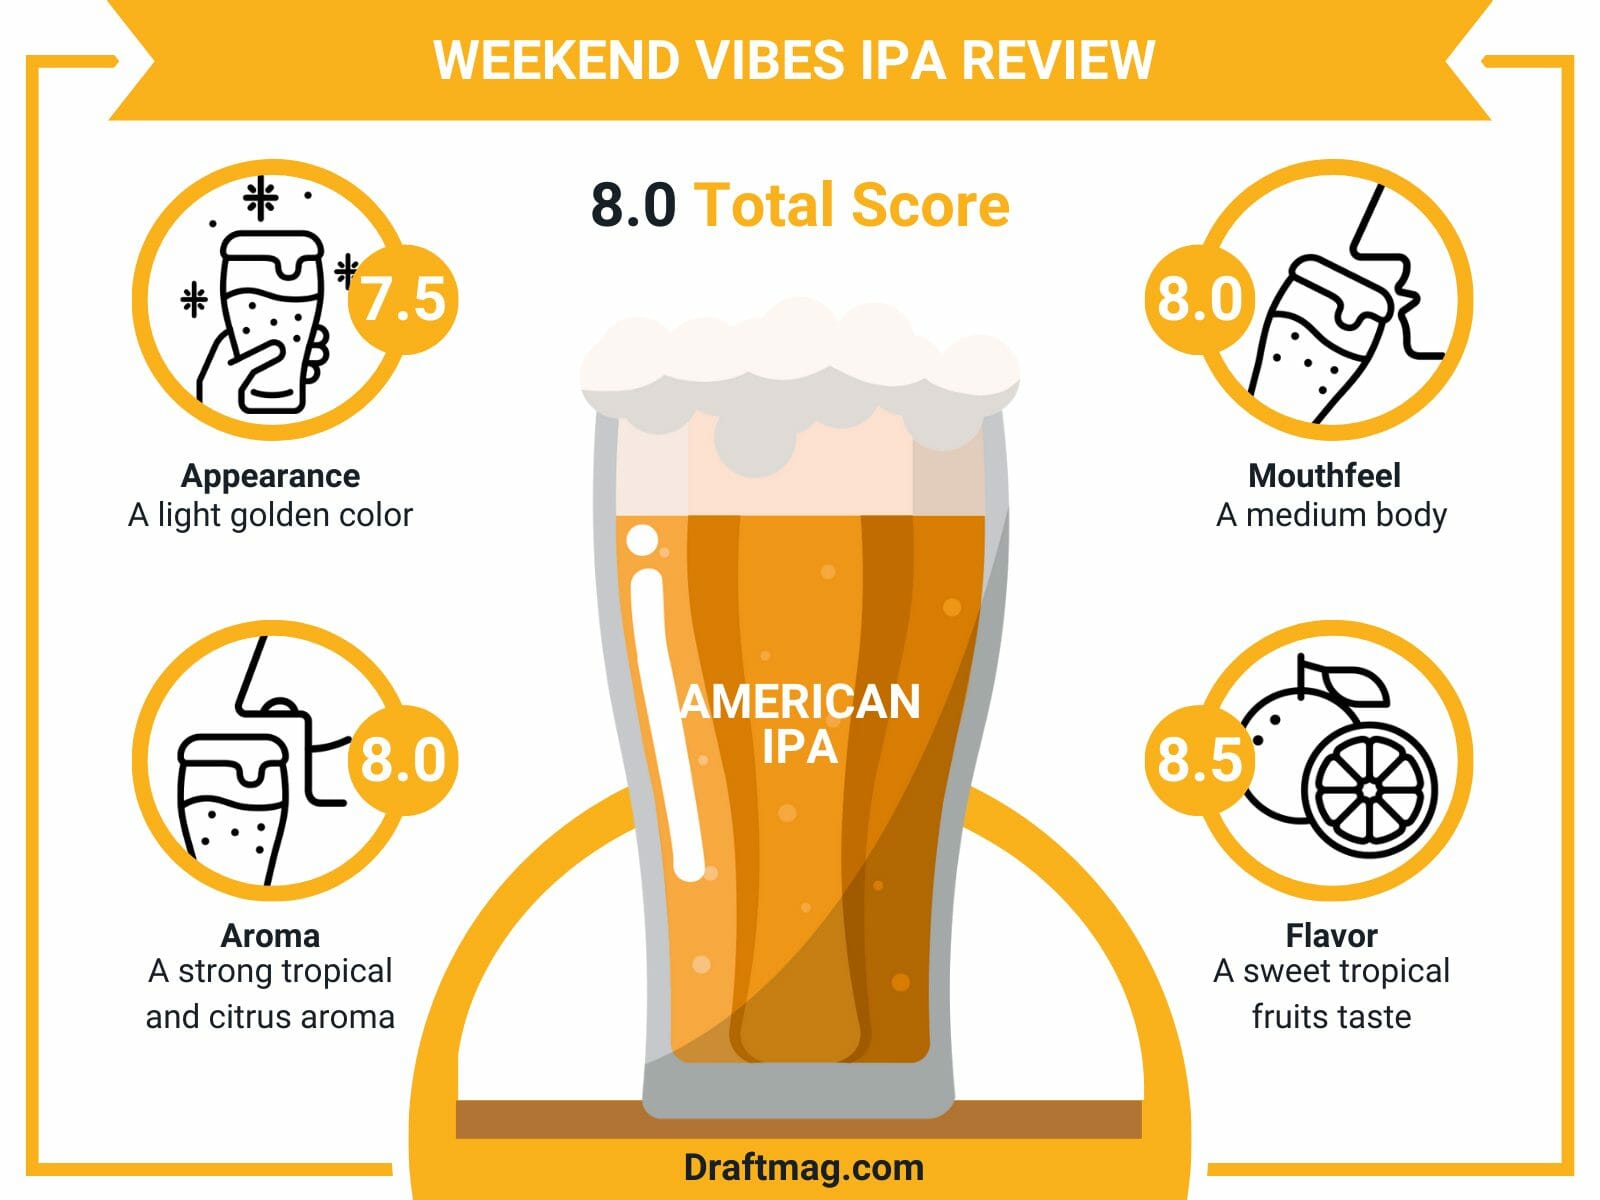 Weekend vibes ipa review infographic